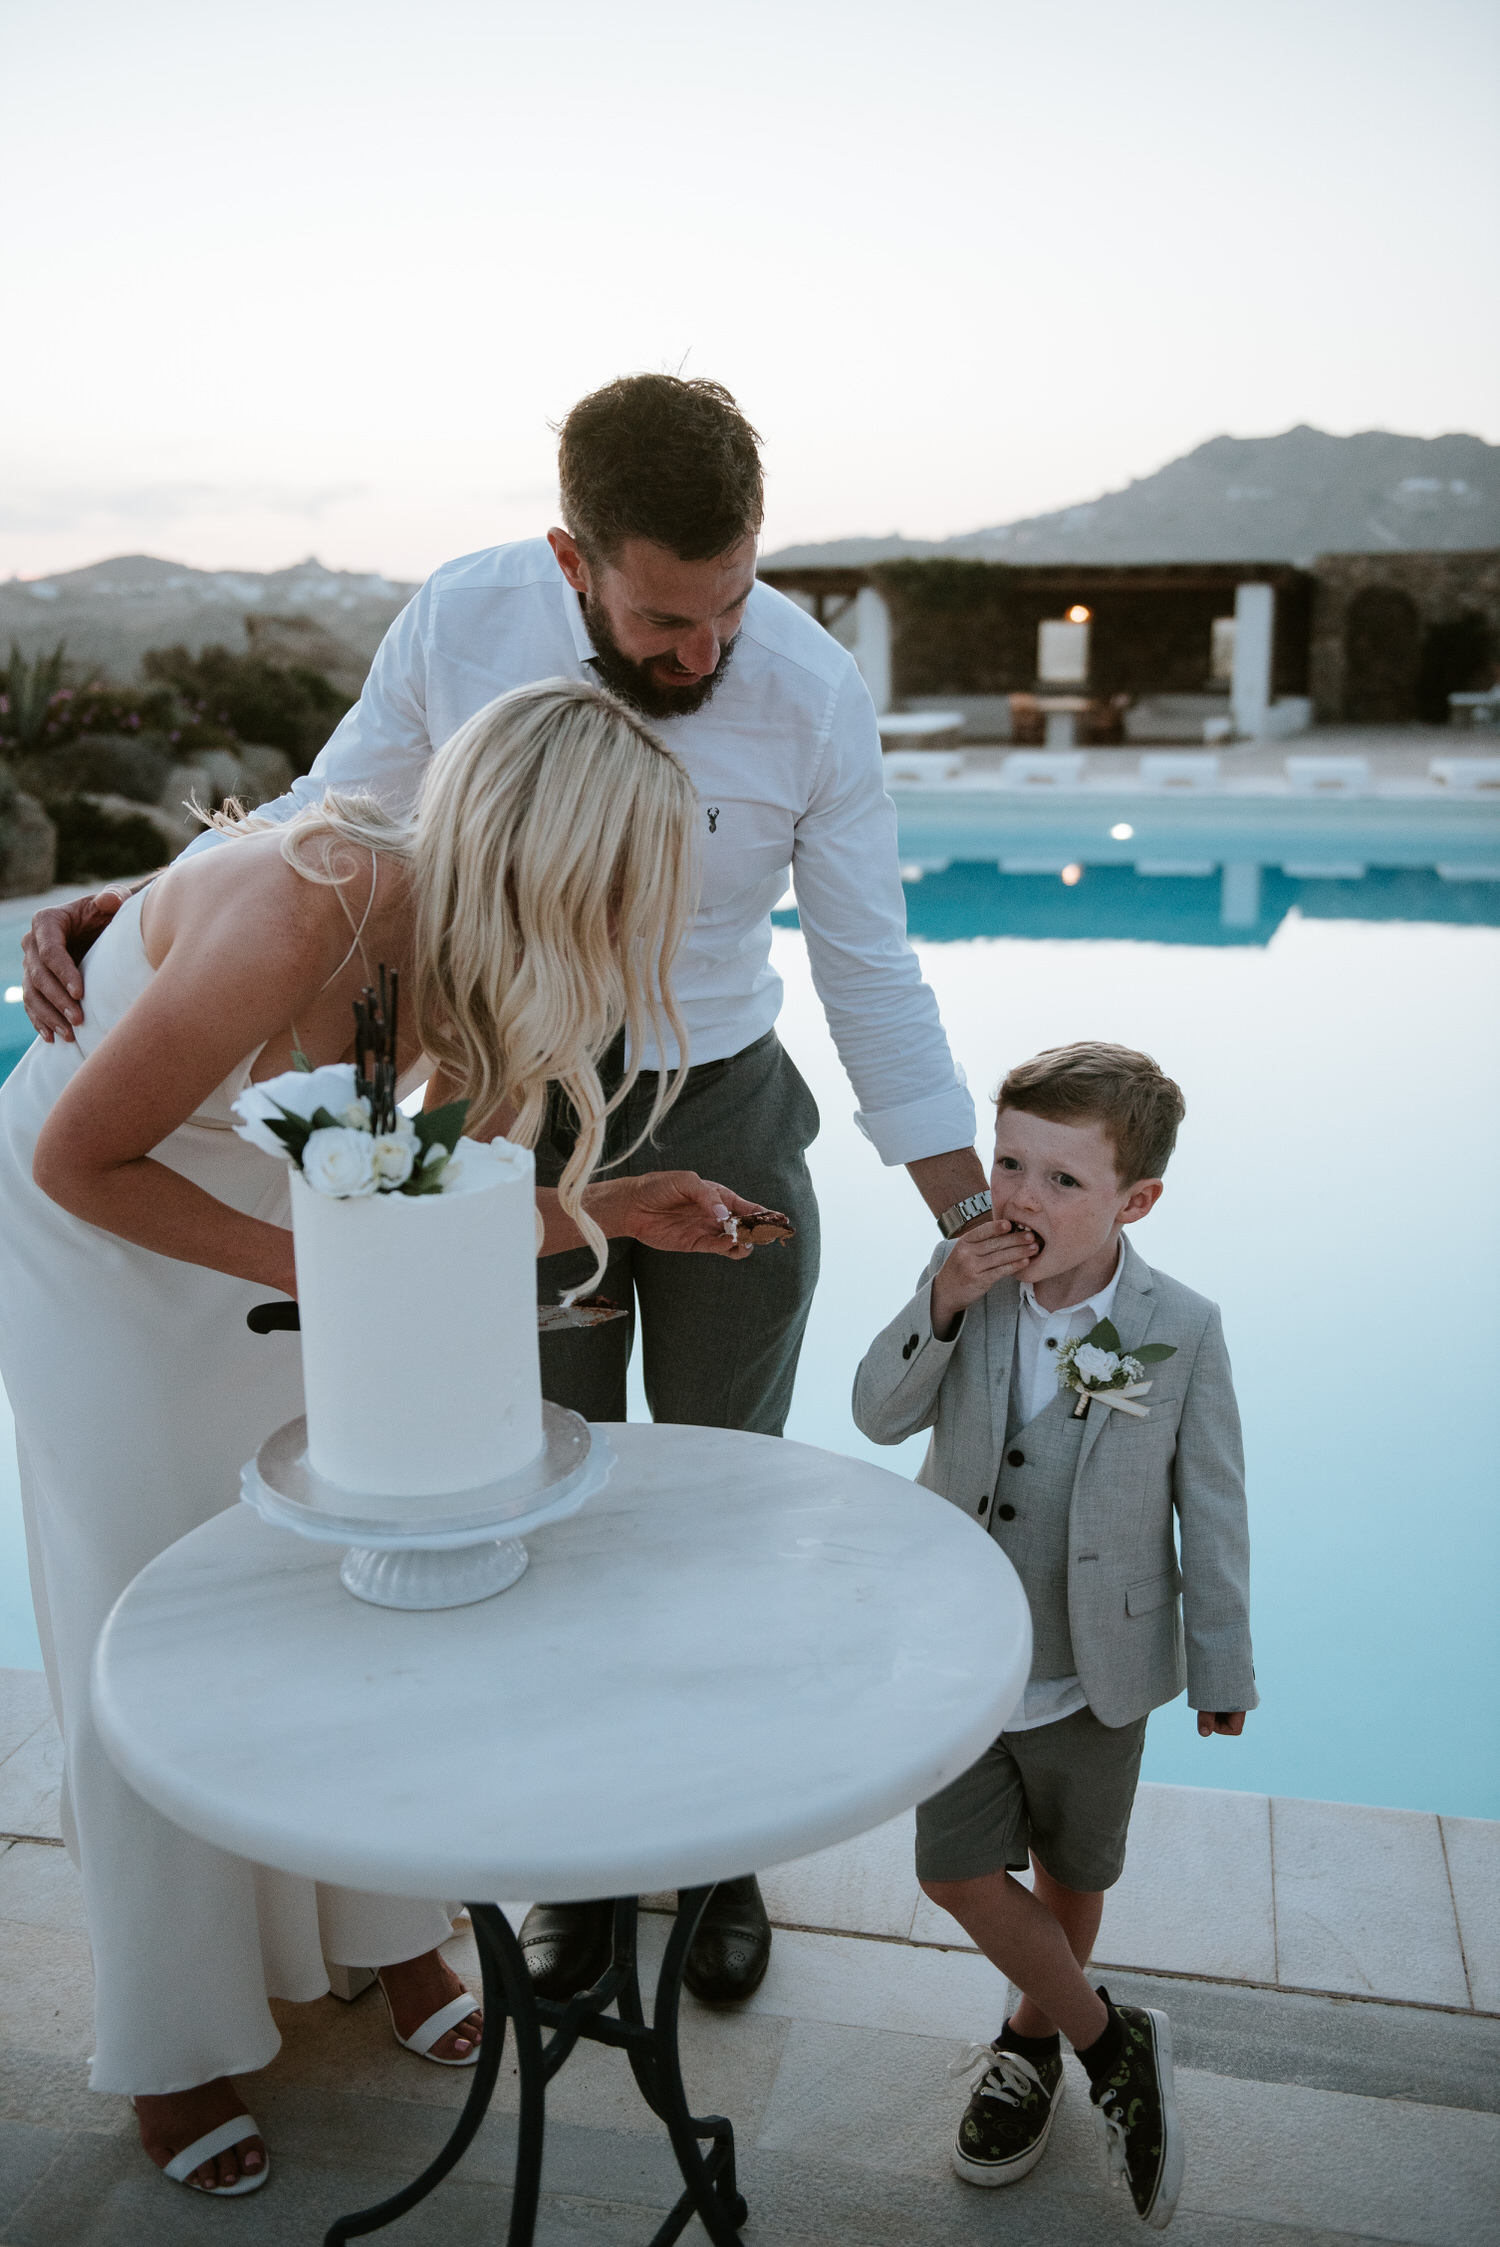 Mykonos wedding photographer: kid testing the cake standing next to bride and groom with pool in the background.